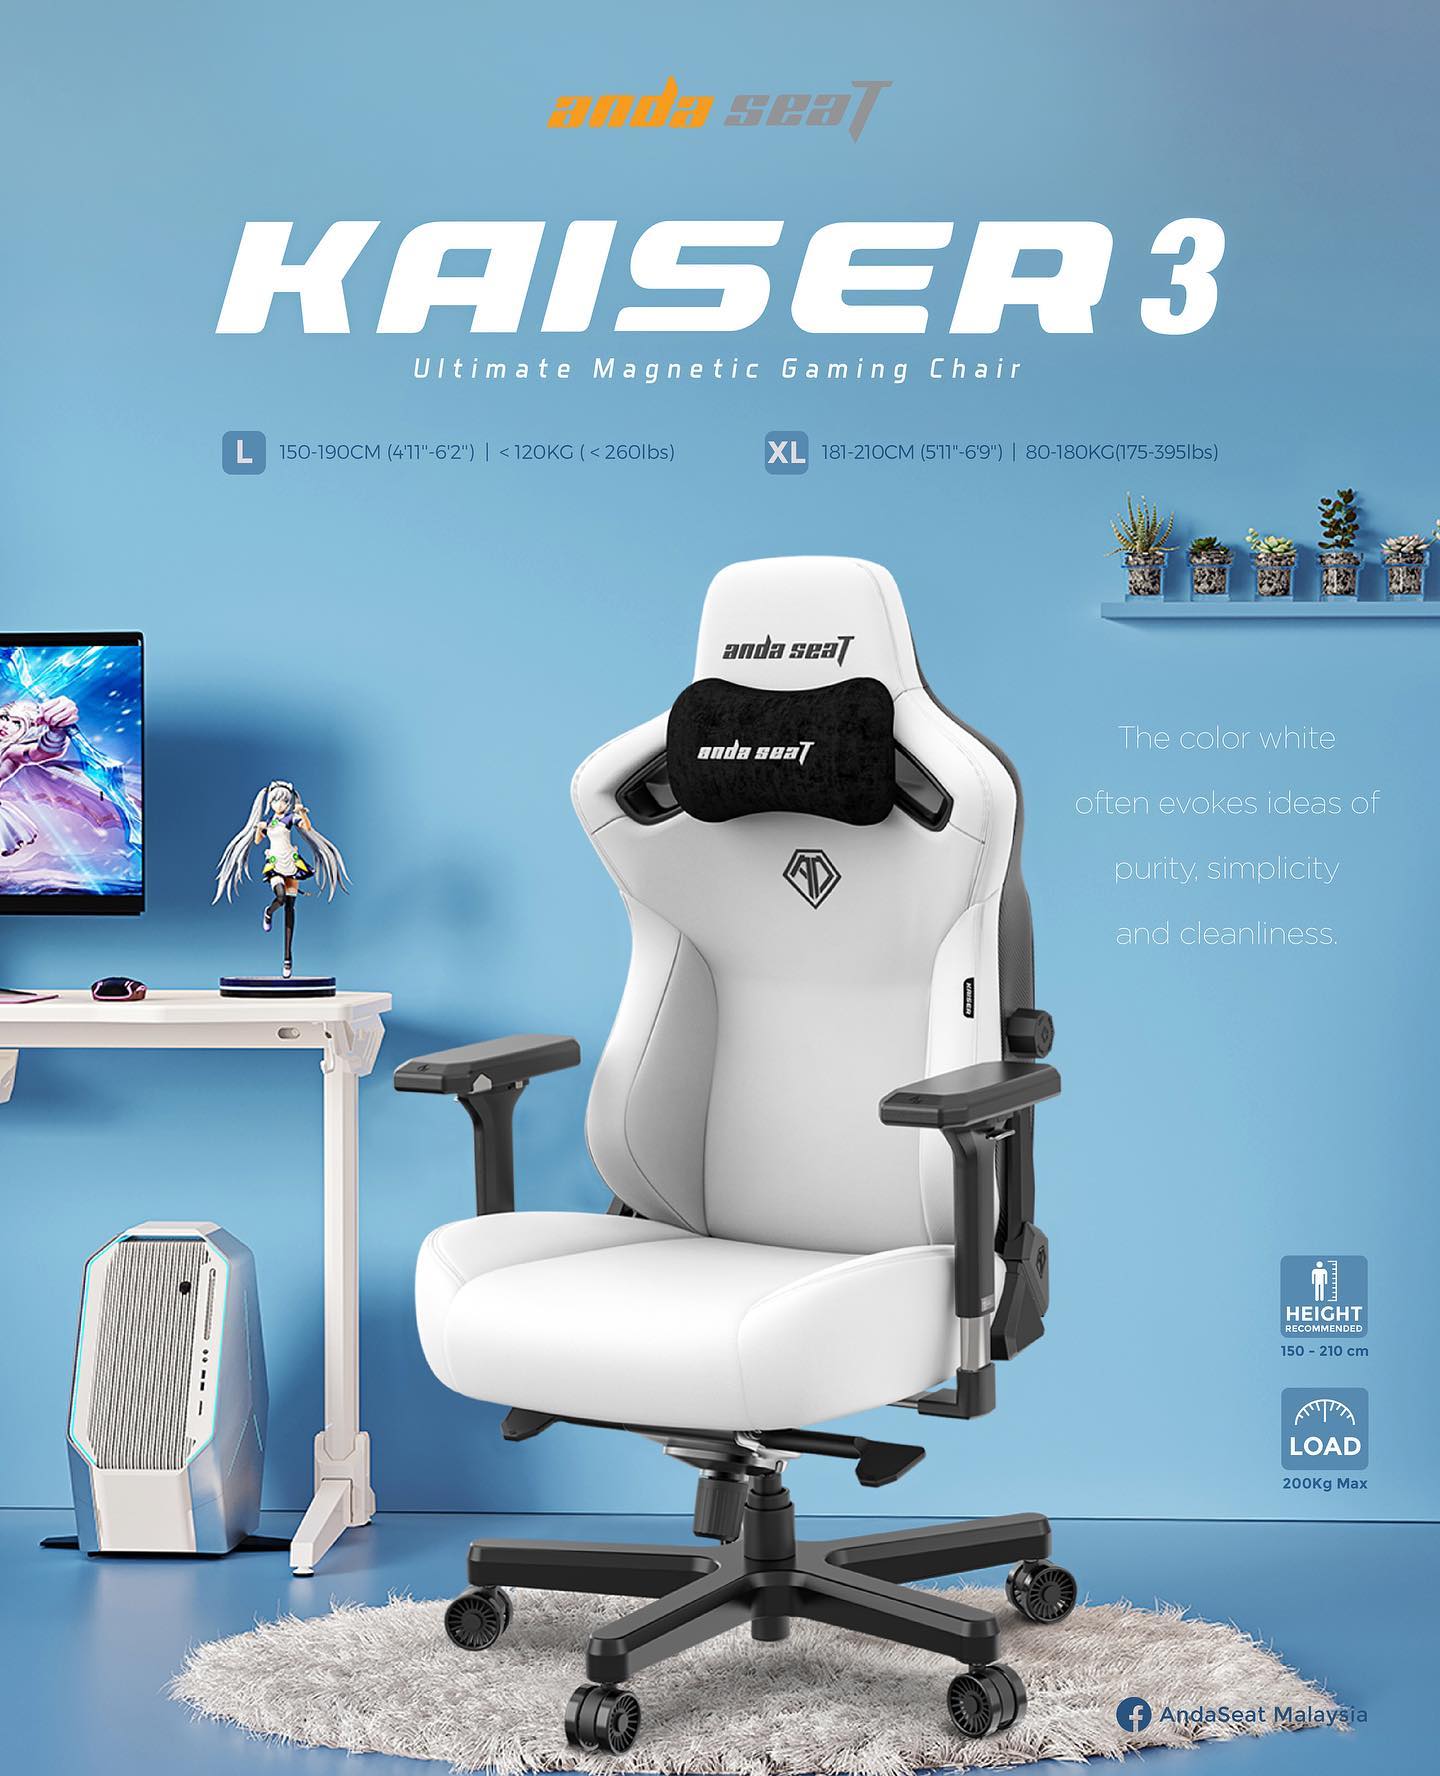 Andaseat Kaiser 3 Supply Restocked, Says Local Distributor